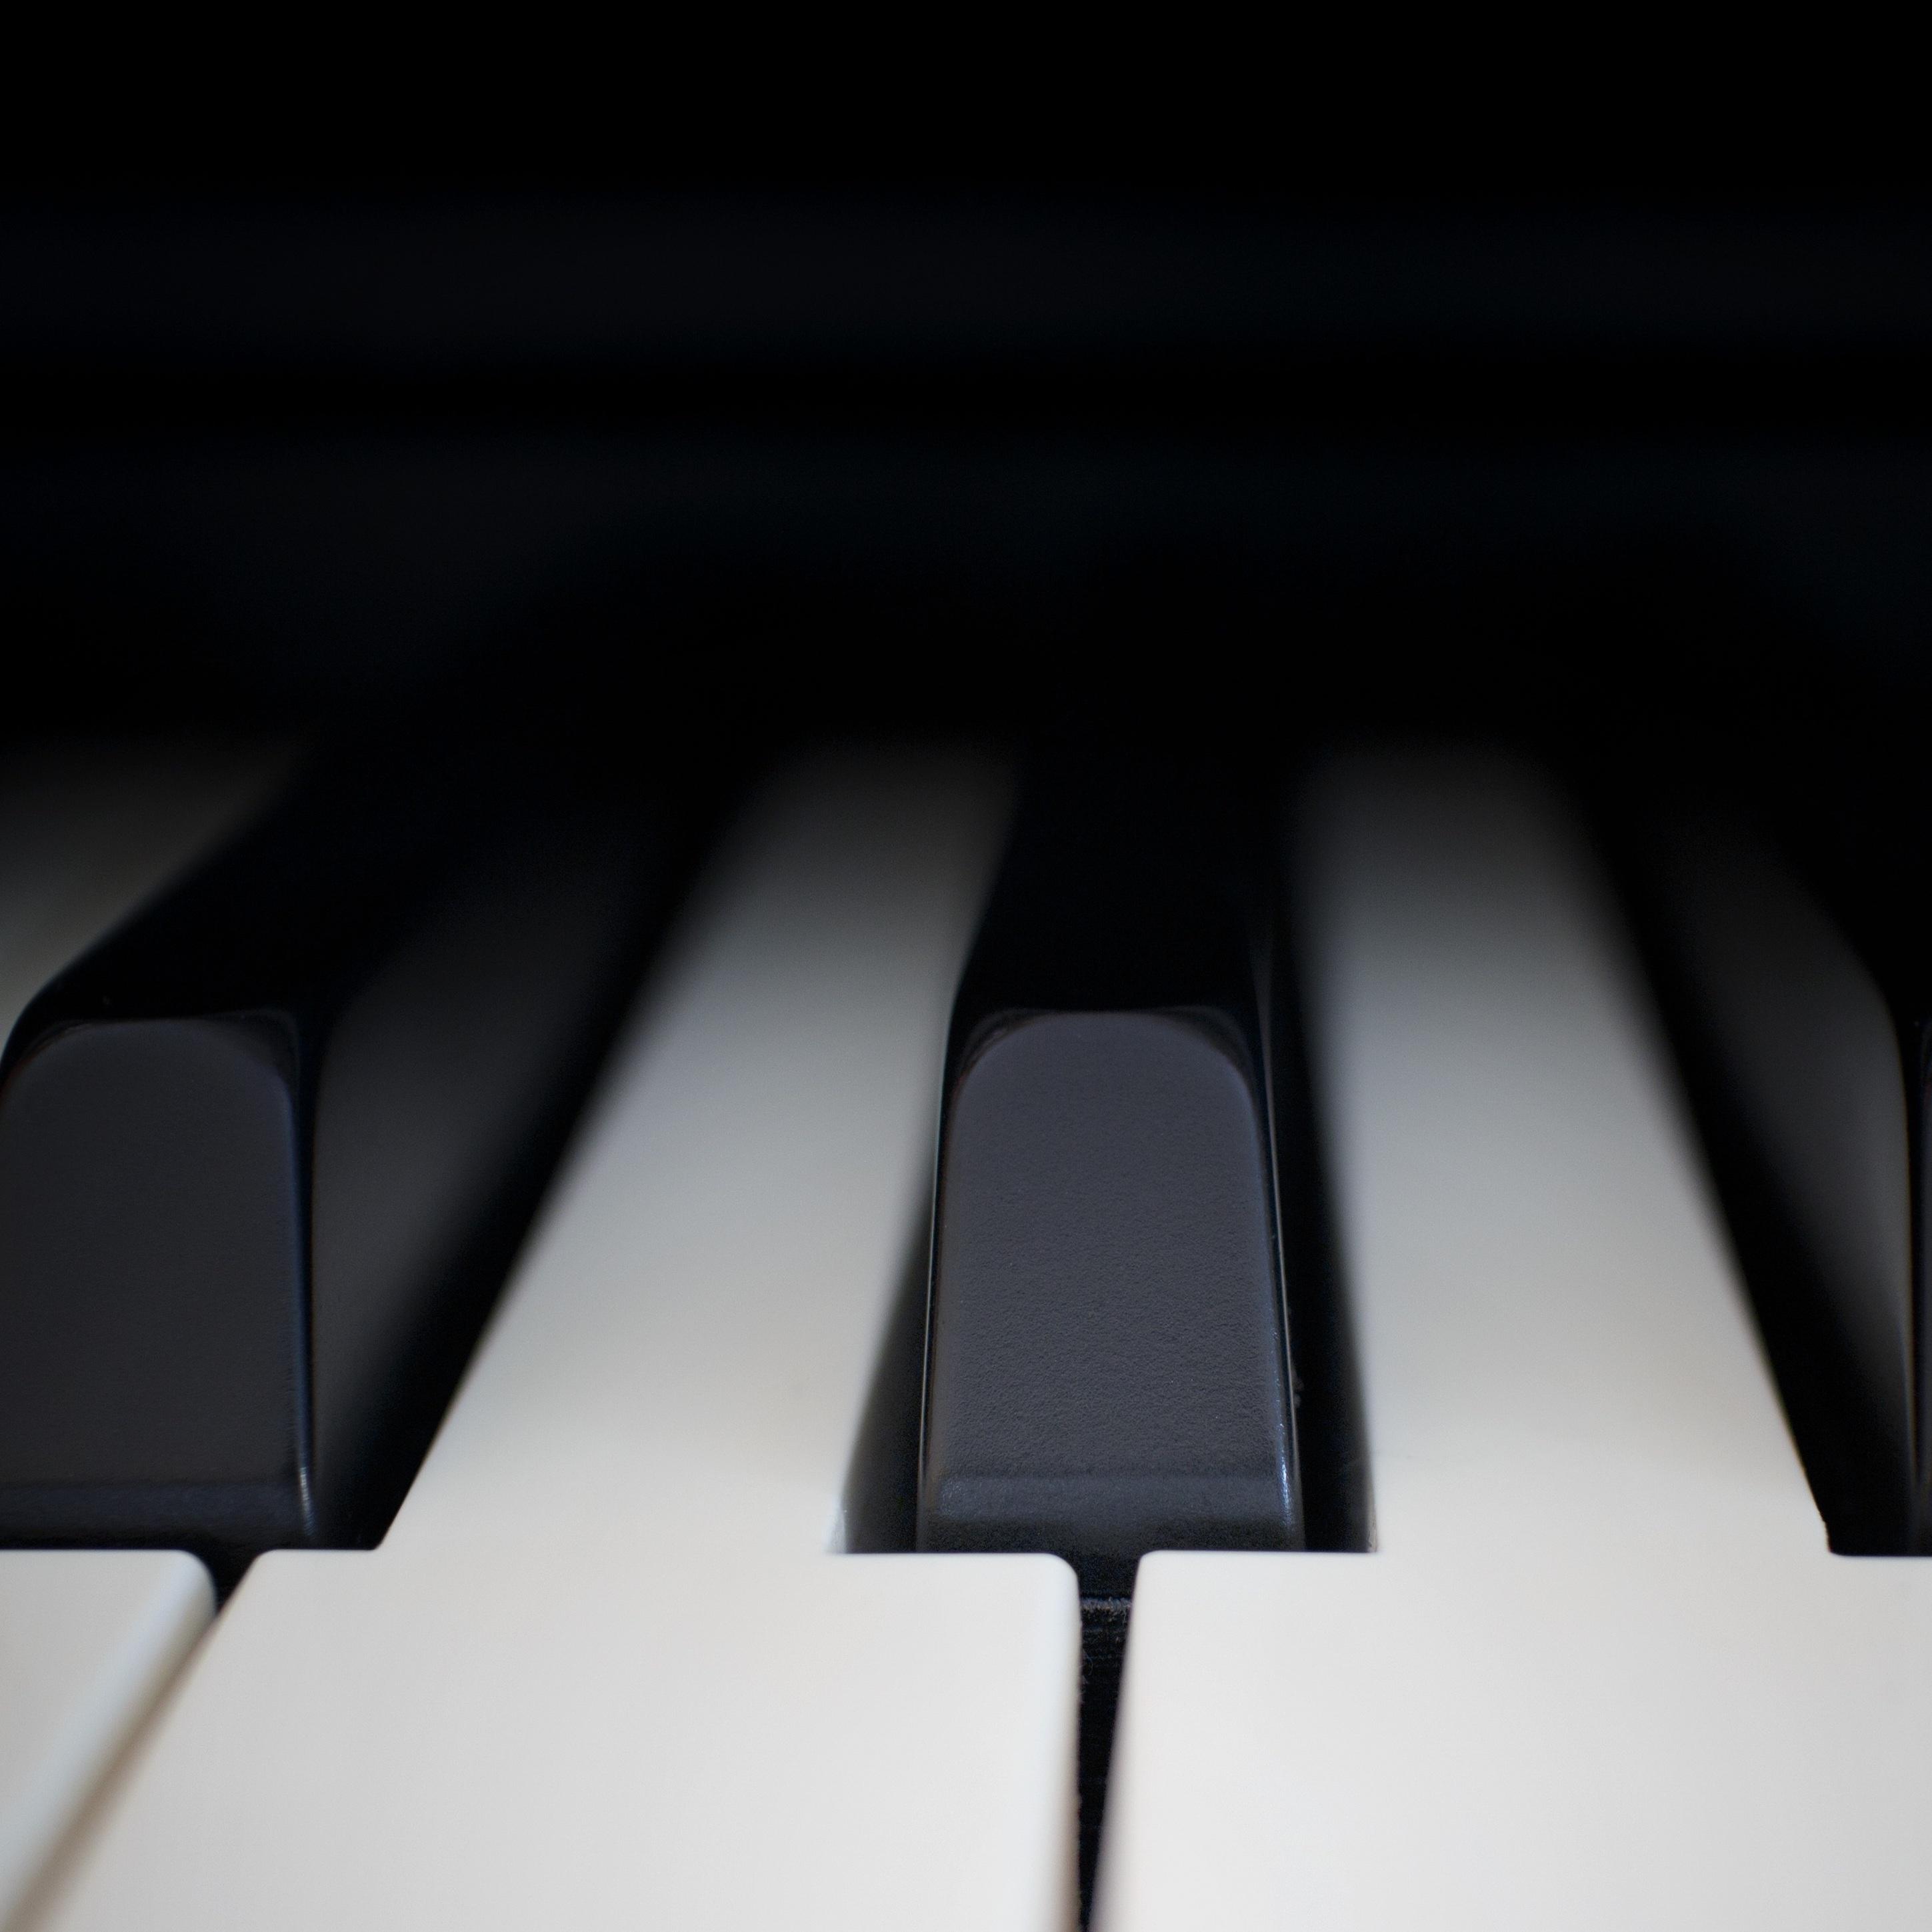 The Ultimate Piano Sessions - a Timeless, Unforgettable Mix for Total Stress and Anxiety Relief